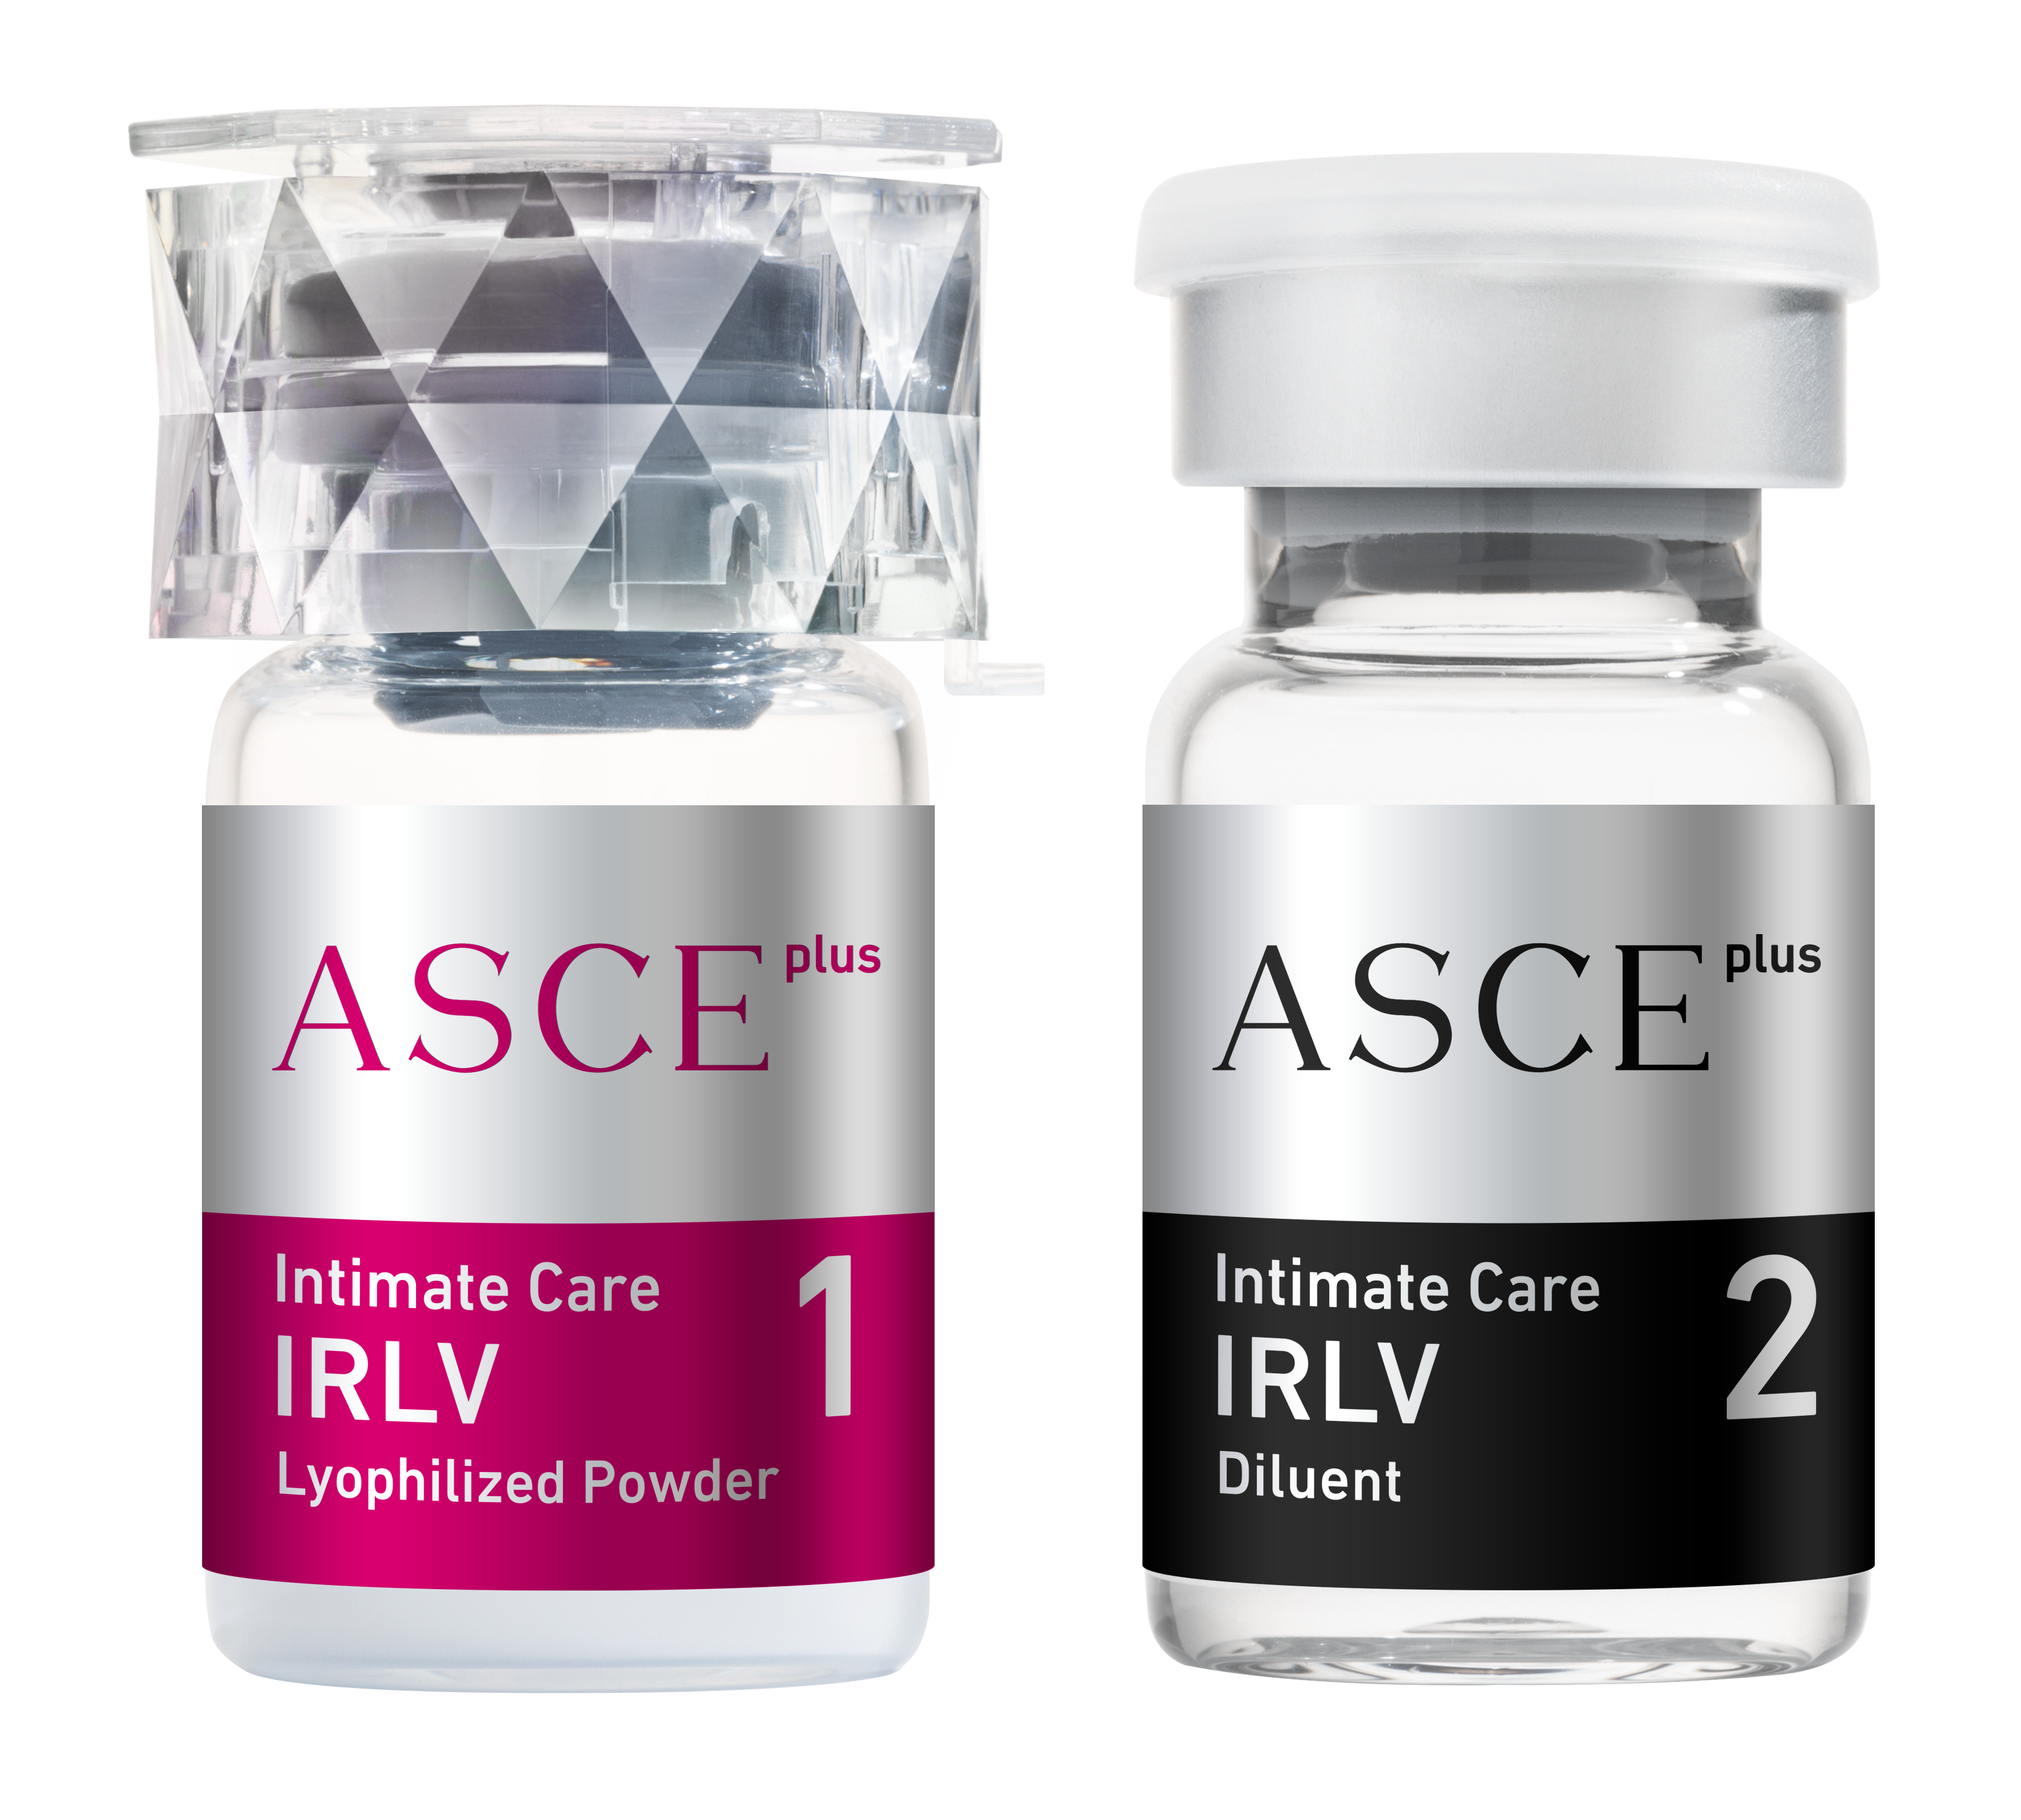 Exosome ASCE+ IRLV (Intimate Care)